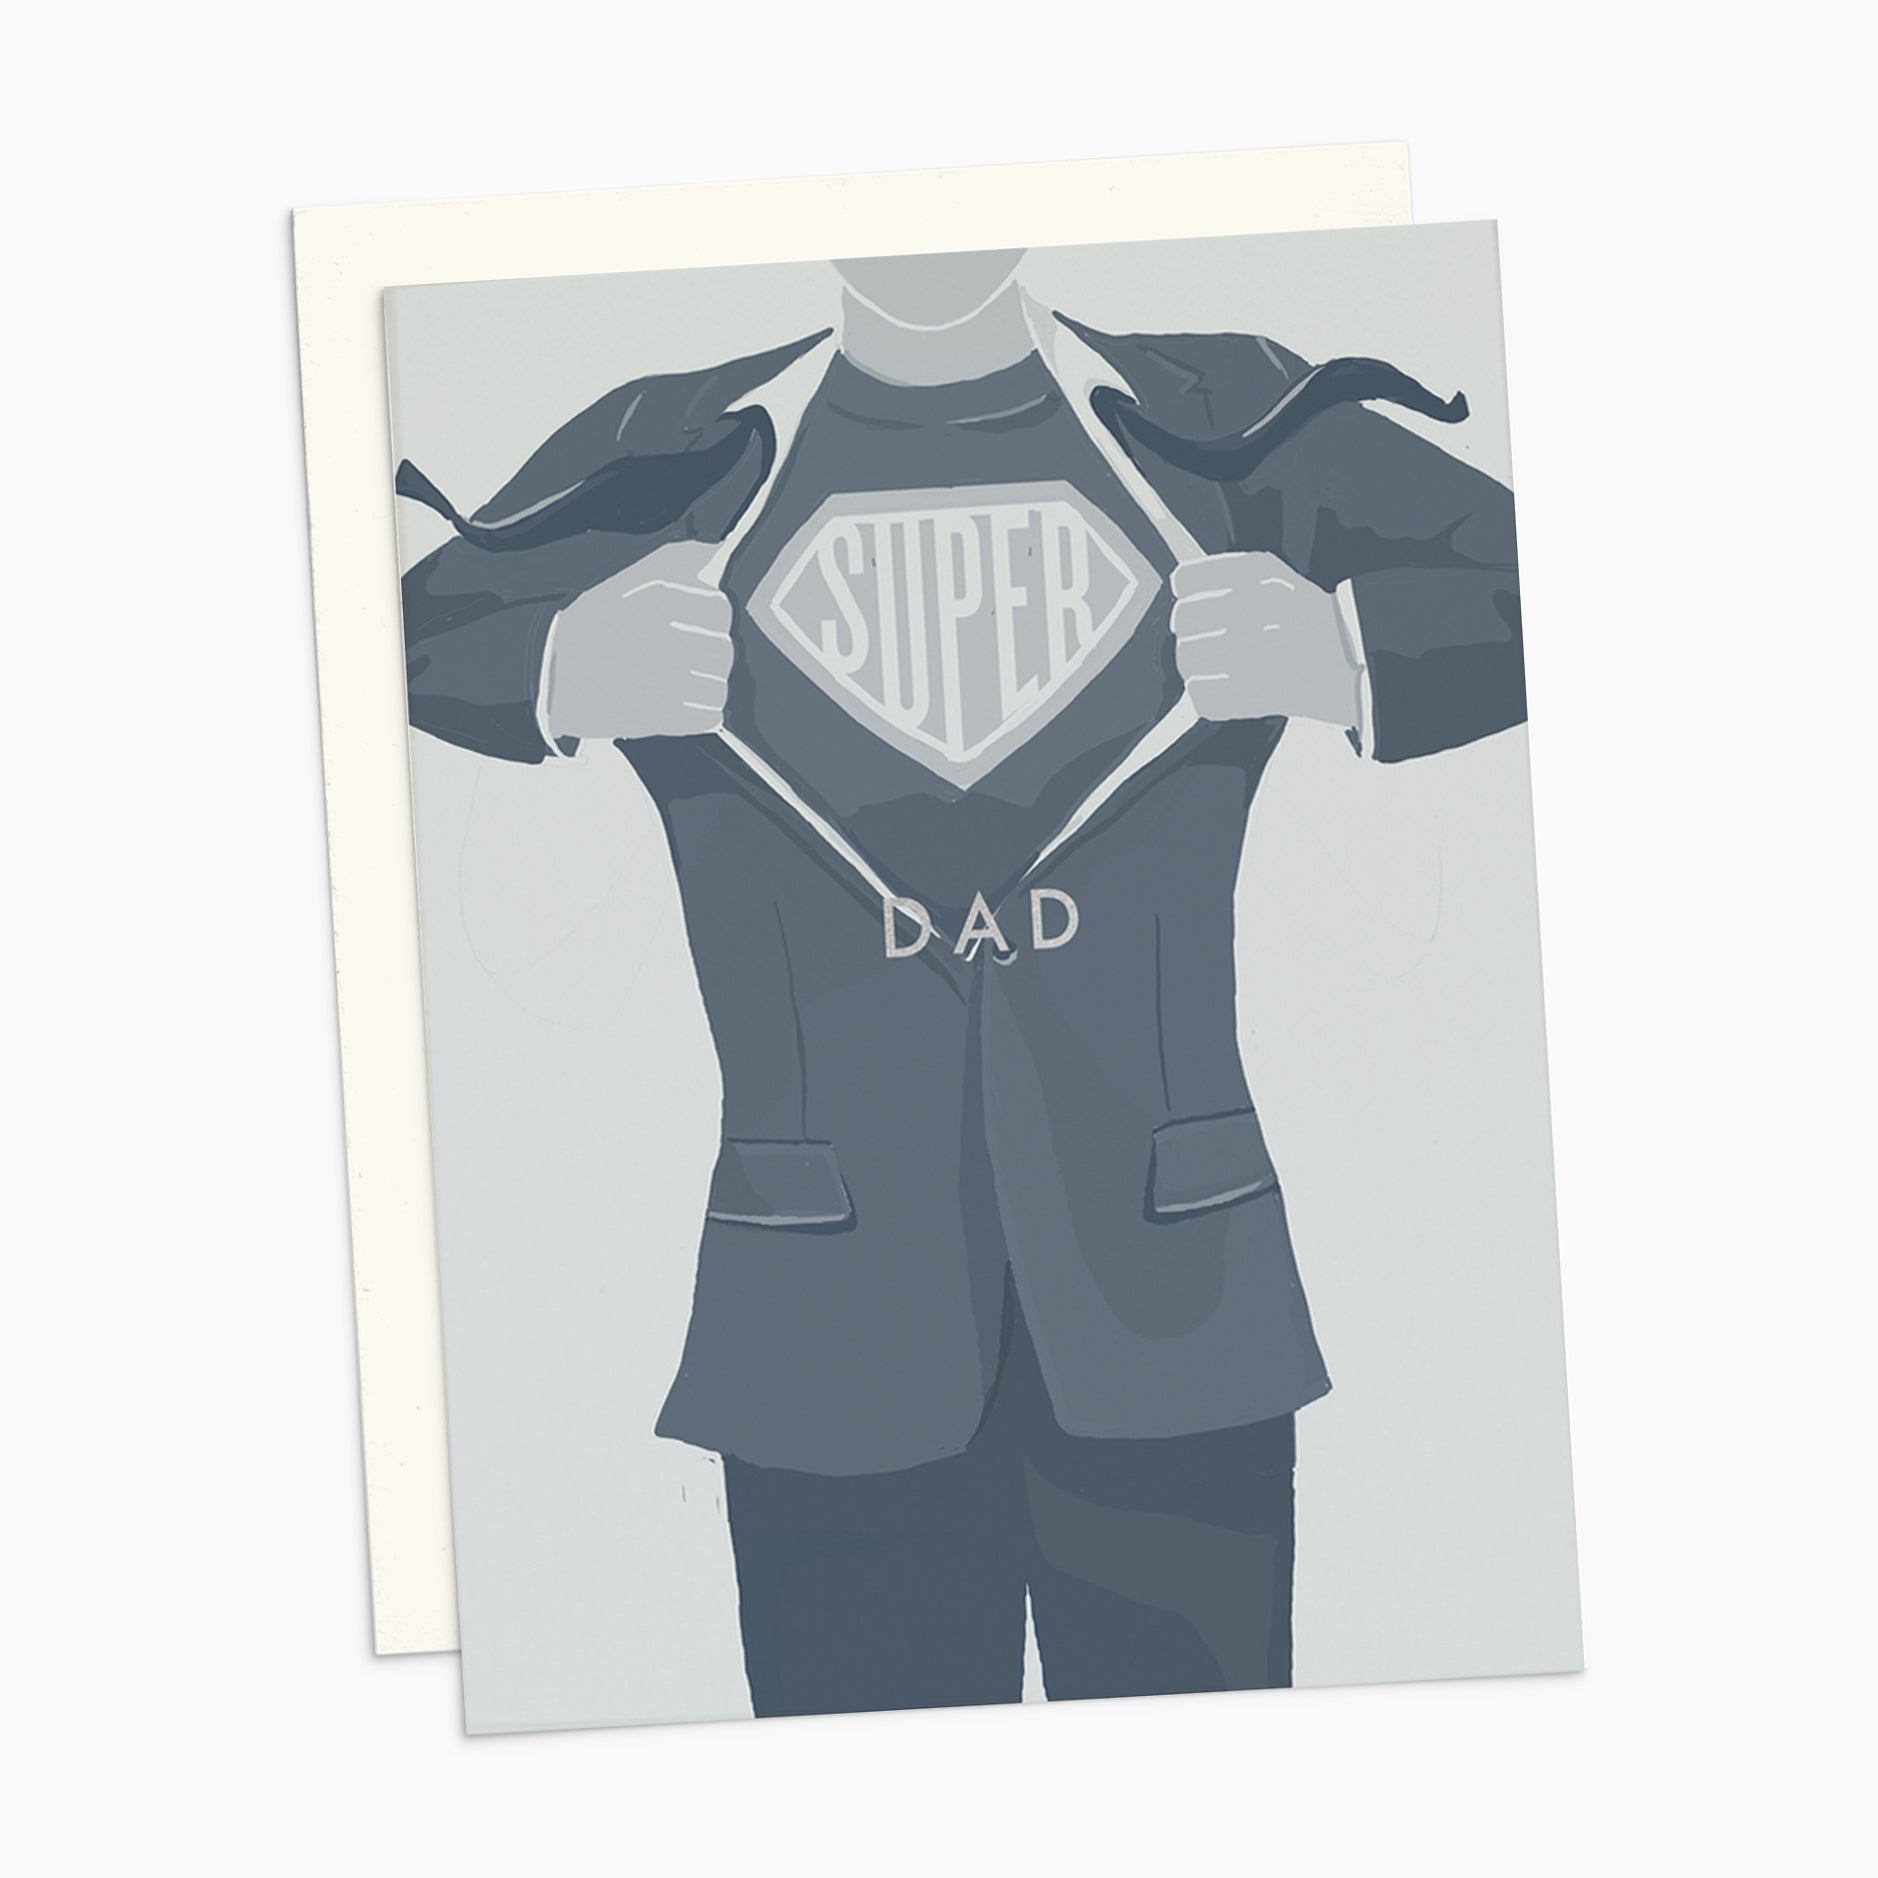 Illustrated Father's Day card featuring a man in Superman pose, opening his suit to reveal a 'Super Dad' shirt, printed on warm white cardstock.